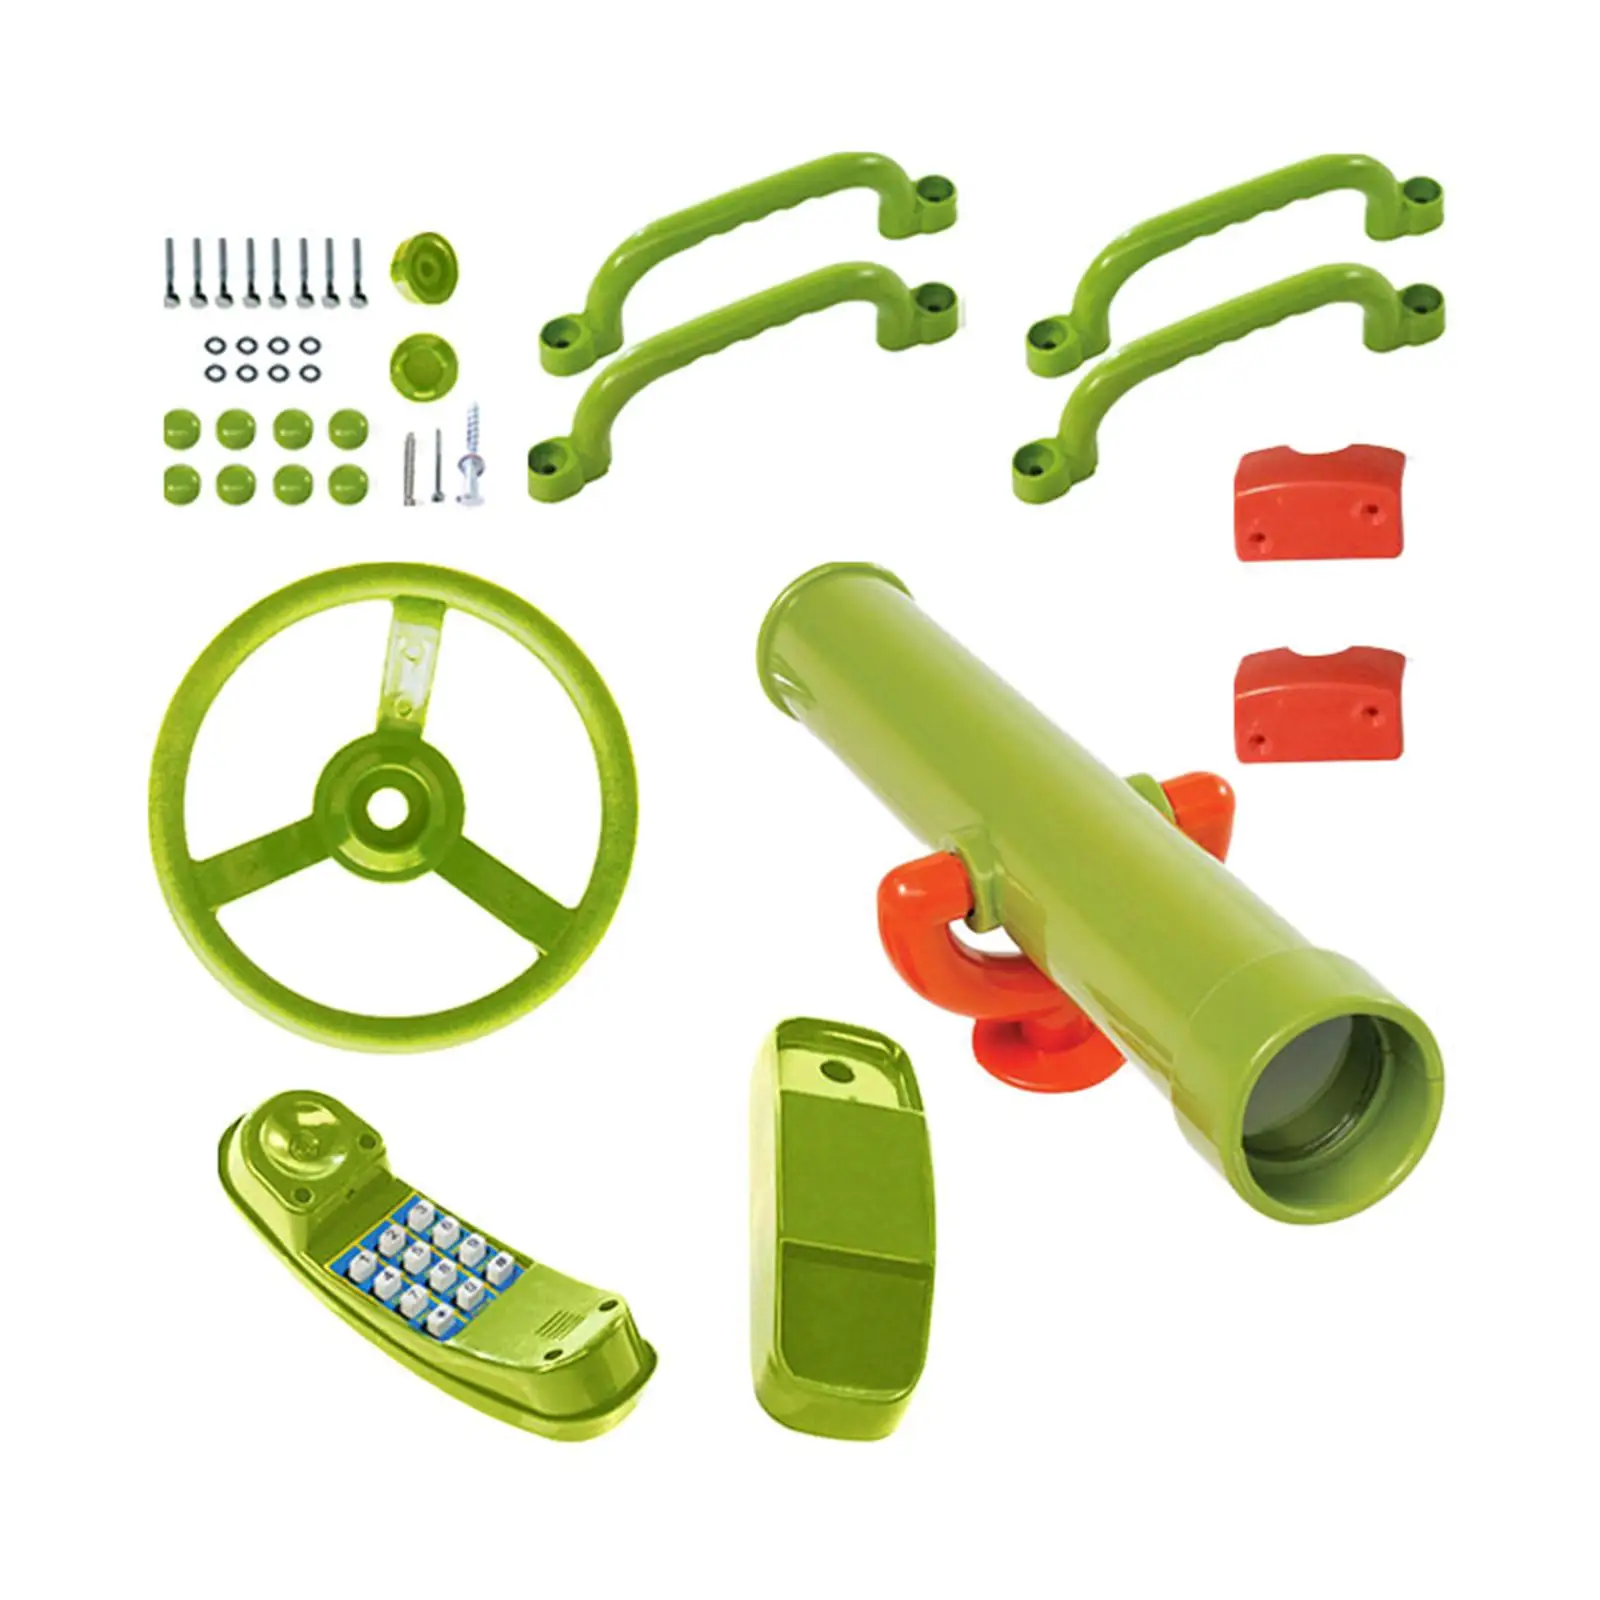 Outdoor Playset Toy Phone Steering Wheel Easy to Install Swing Set Attachments for Backyard treehouse